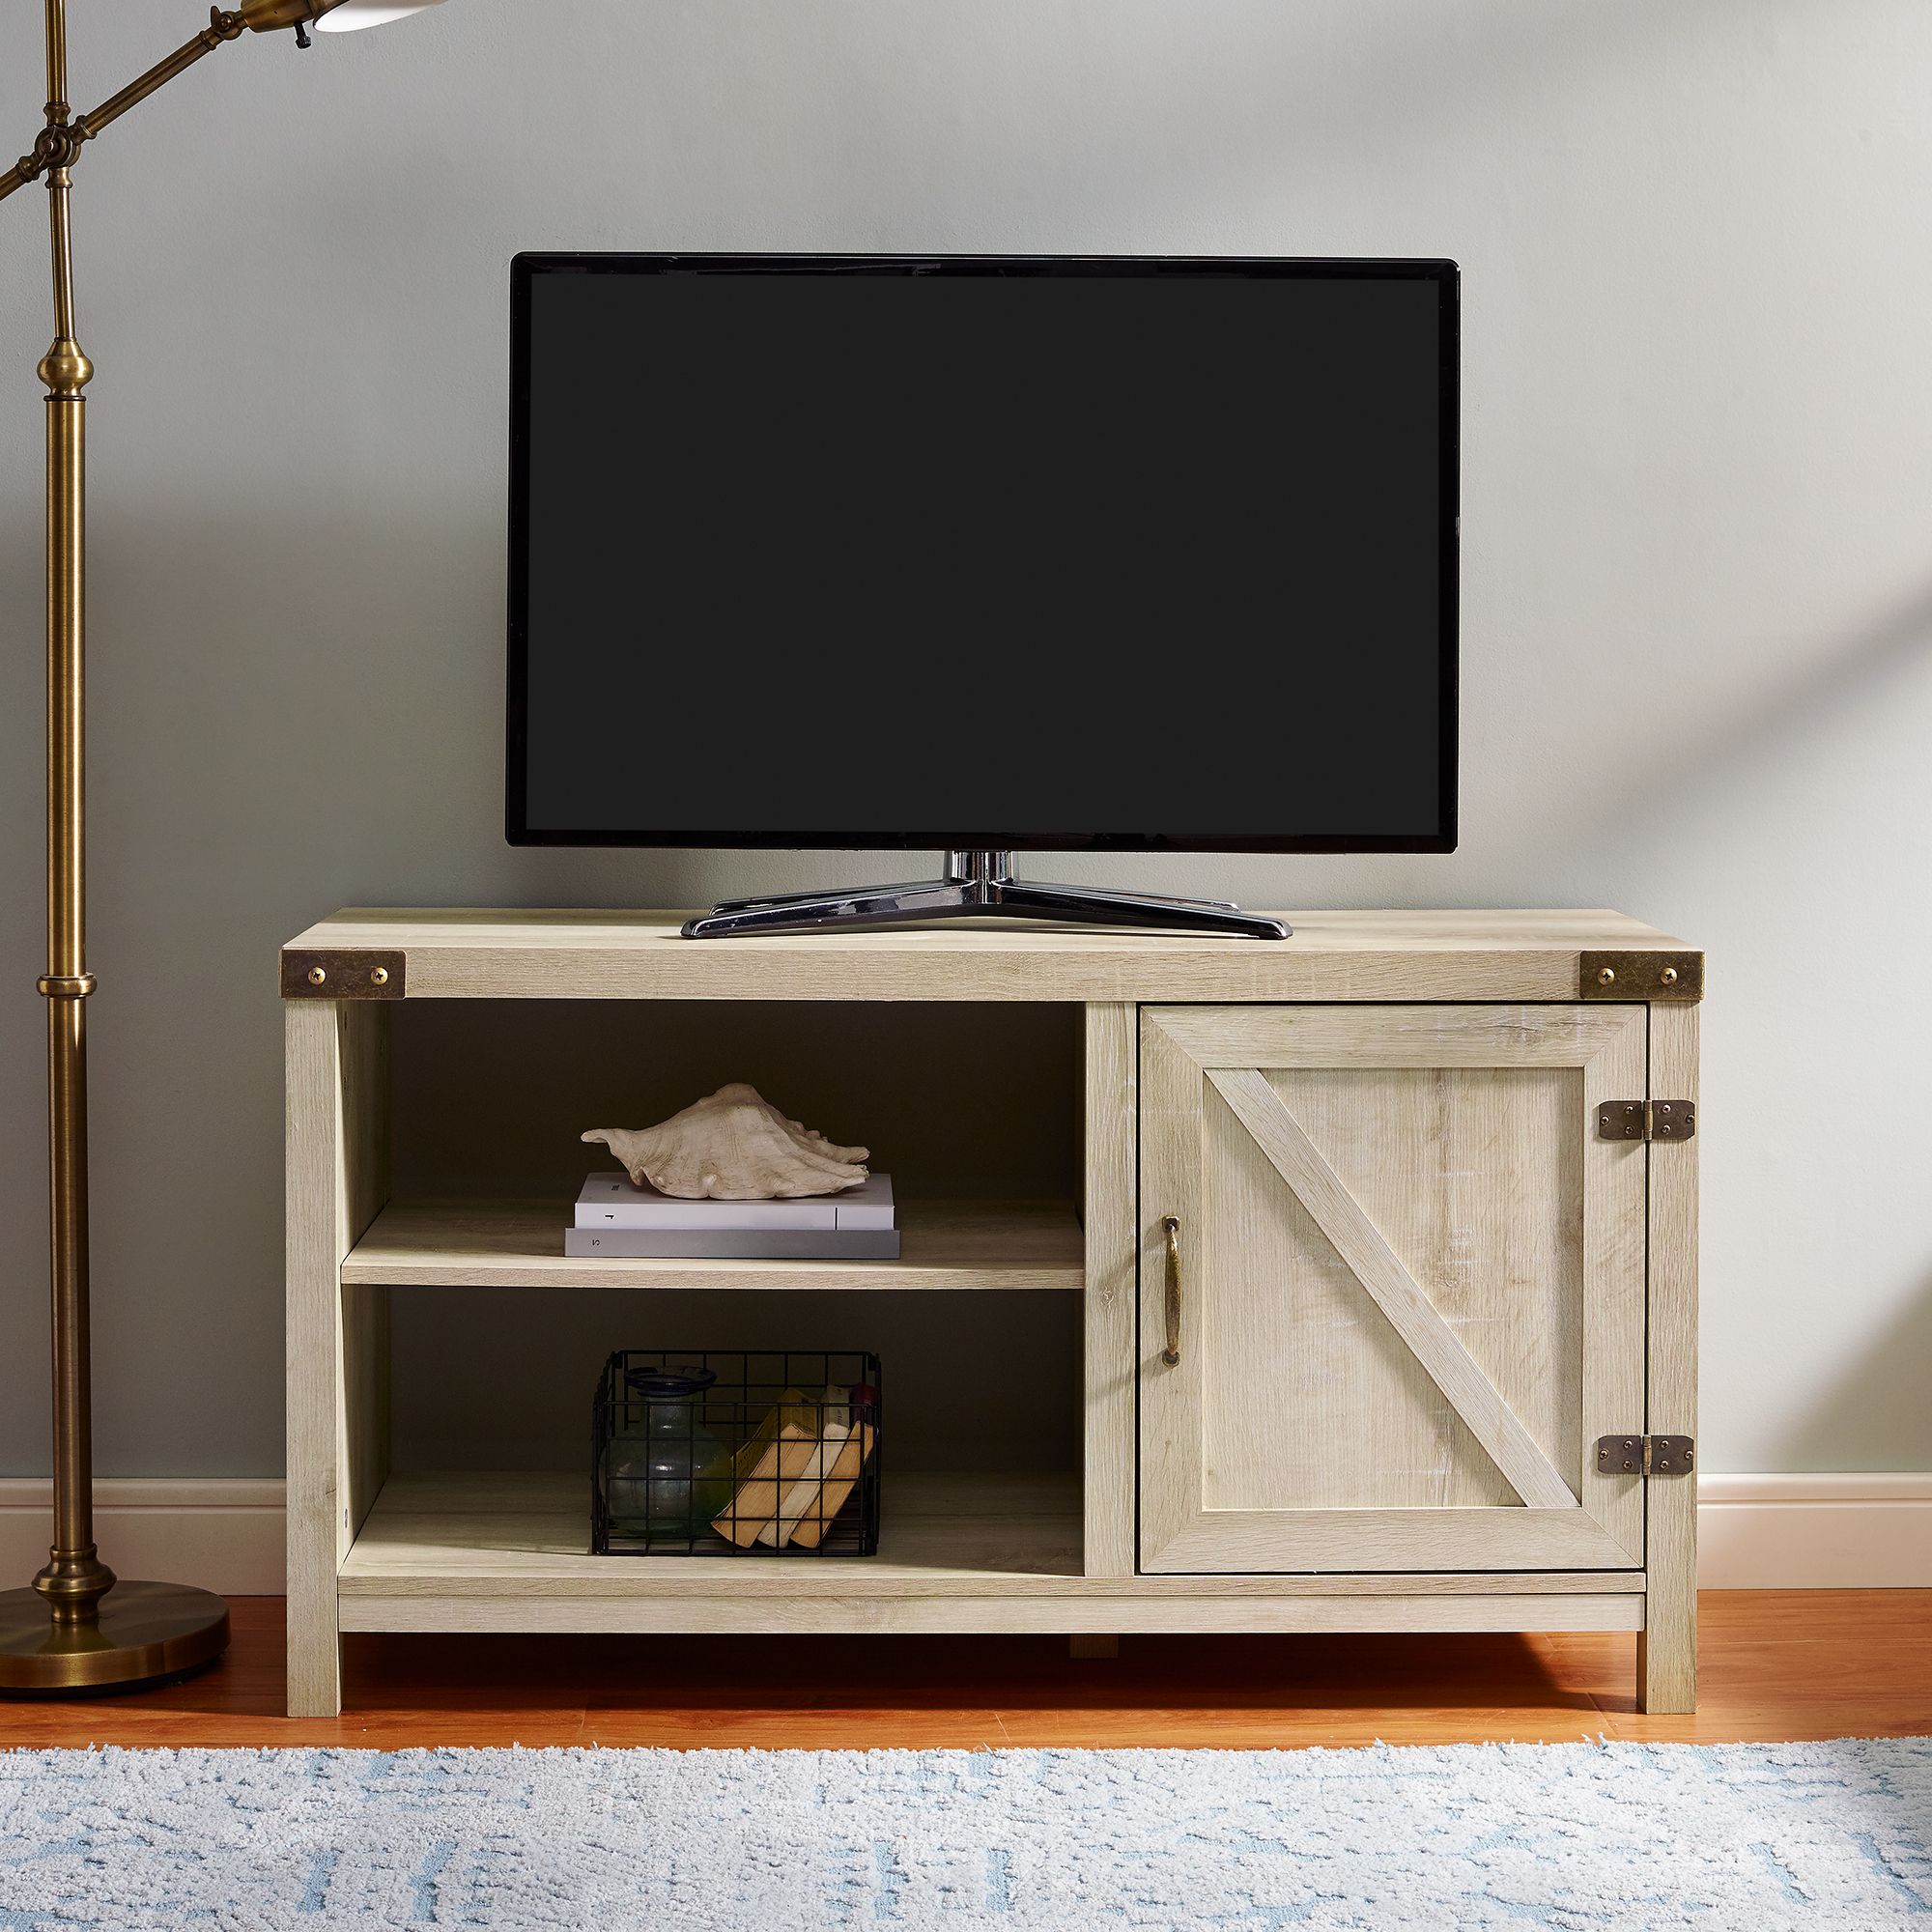 Woven Paths Farmhouse Barn Door Tv Stand For Tvs Up To 50 In Mclelland Tv Stands For Tvs Up To 50" (View 3 of 20)